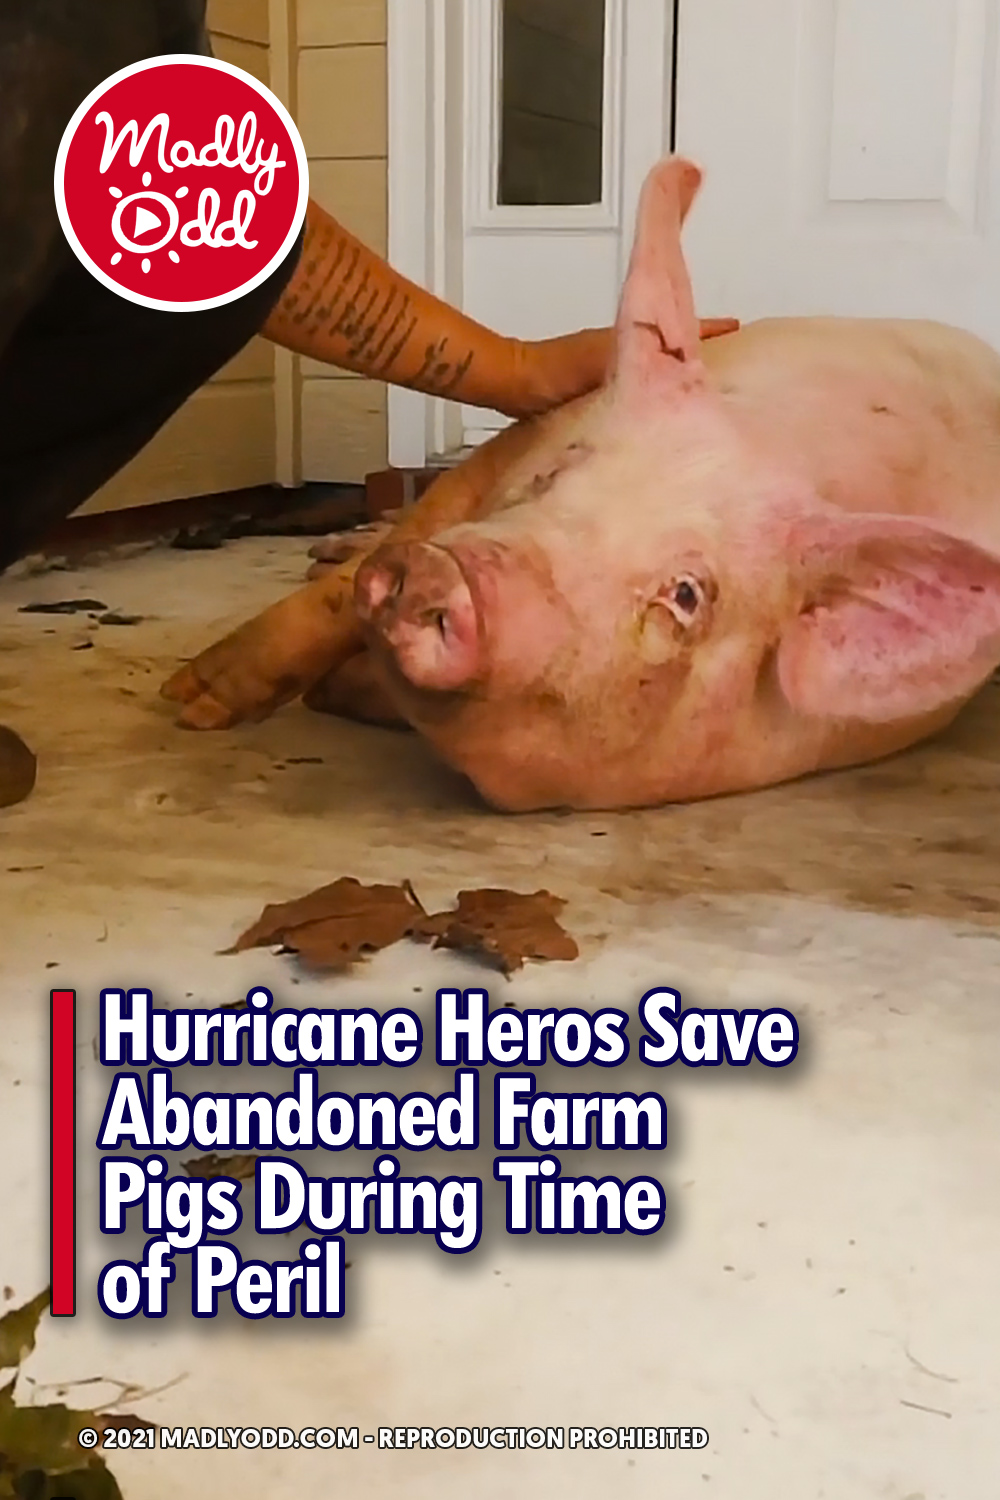 Hurricane Heros Save Abandoned Farm Pigs During Time of Peril